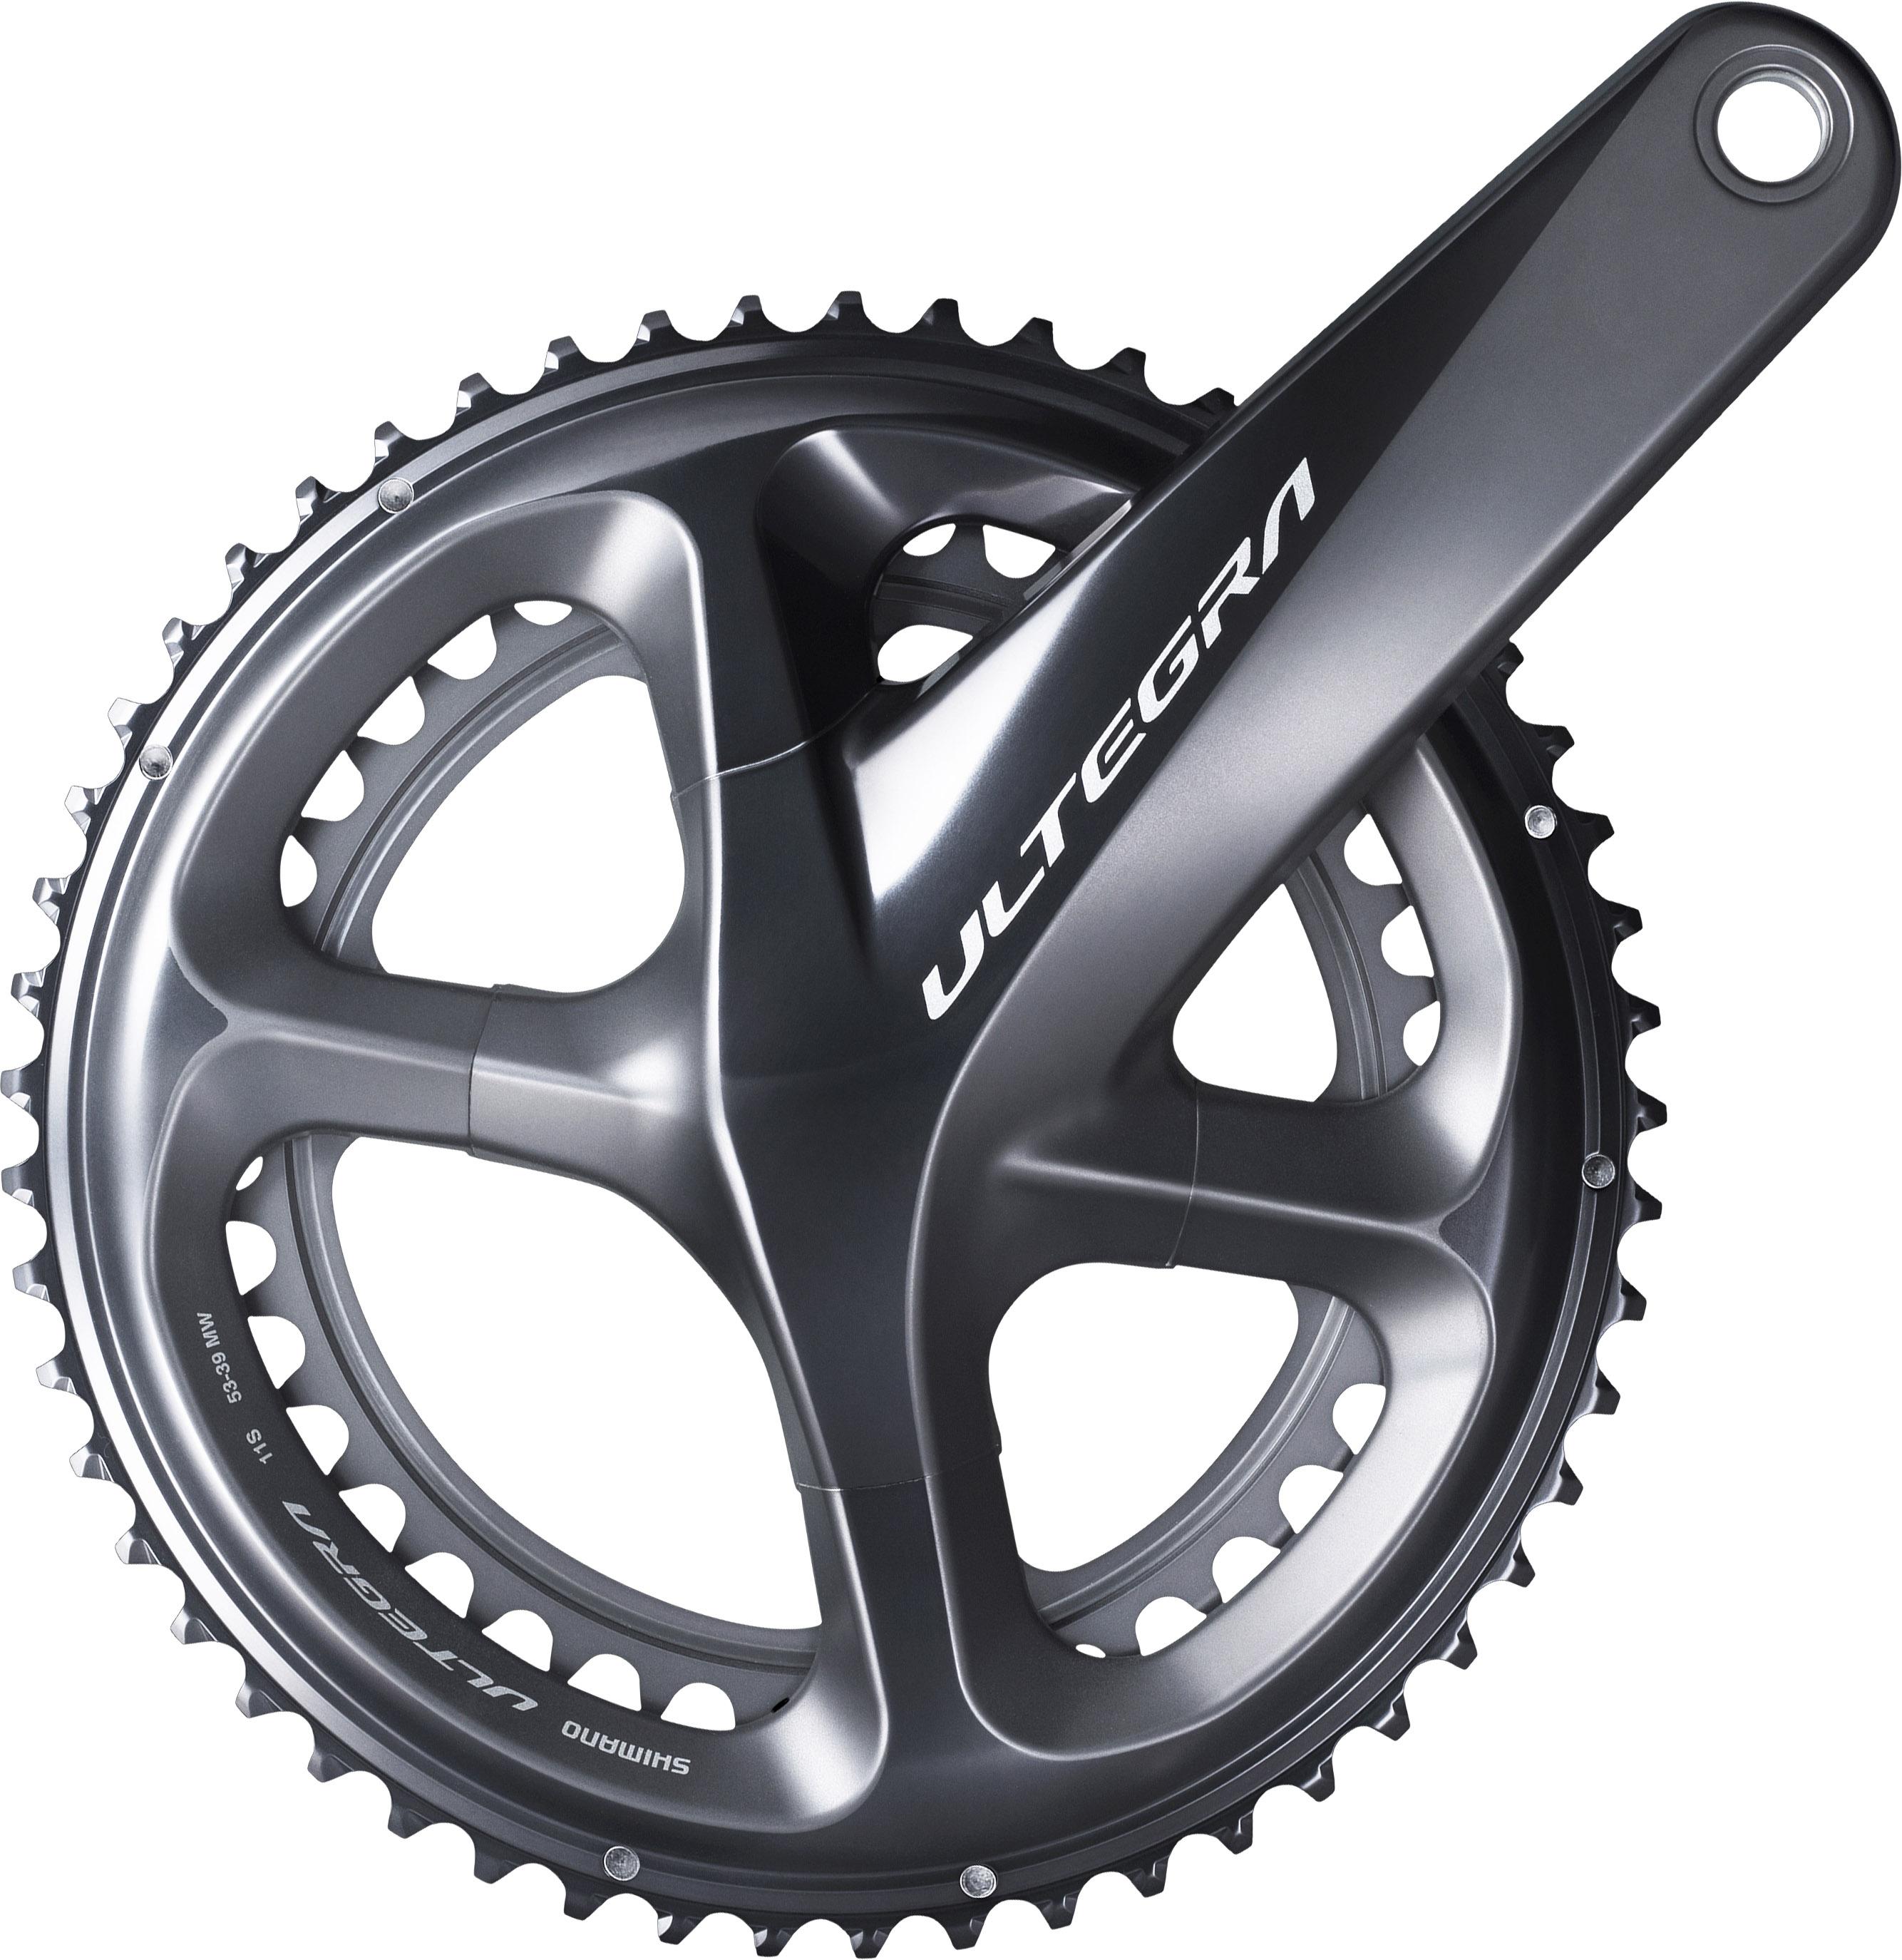 Shimano Ultegra R8000 11sp Road Double Chainset  Grey